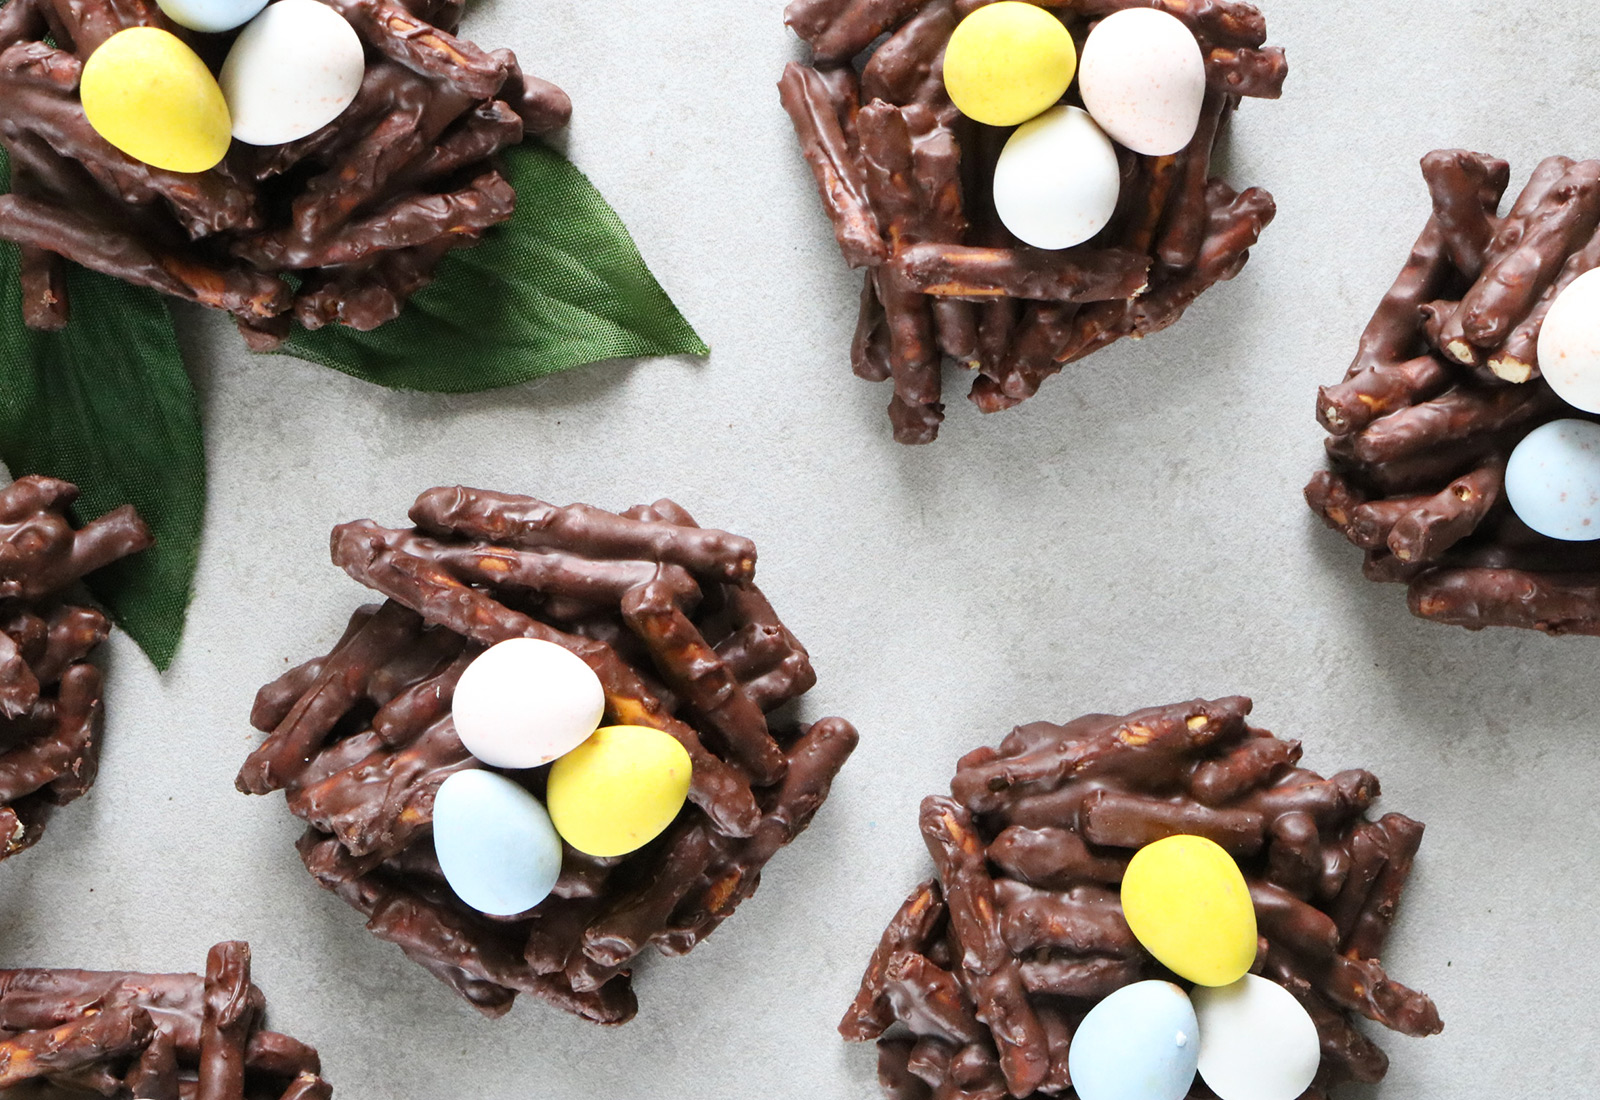 How to Make Bird's Nest Cookies for Easter